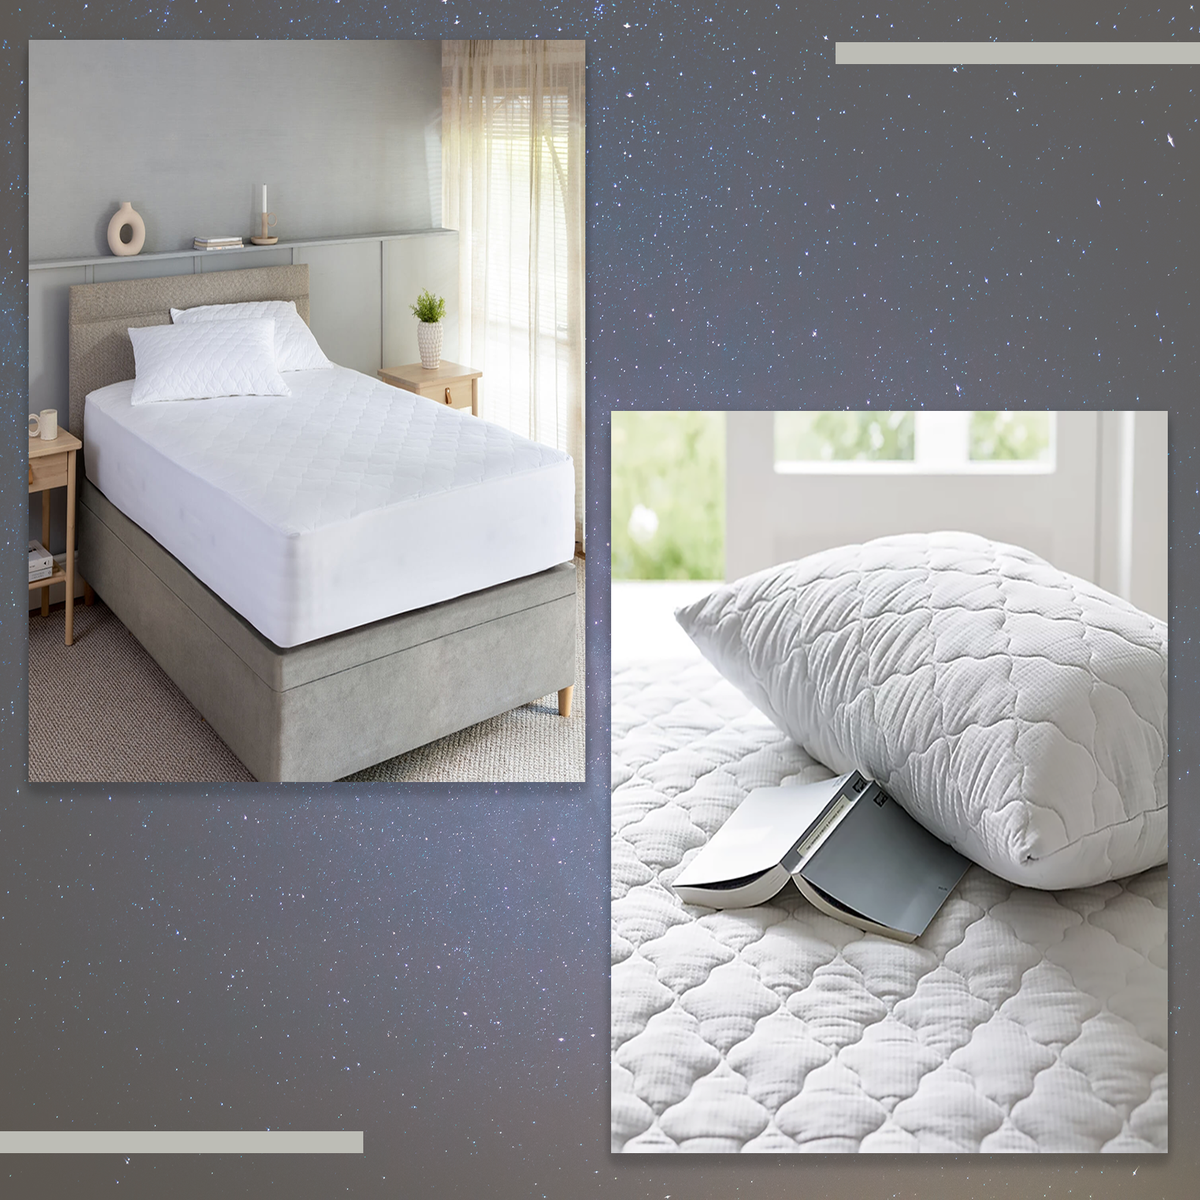 https://static.independent.co.uk/2023/04/25/17/Mattress%20toppers.png?width=1200&height=1200&fit=crop